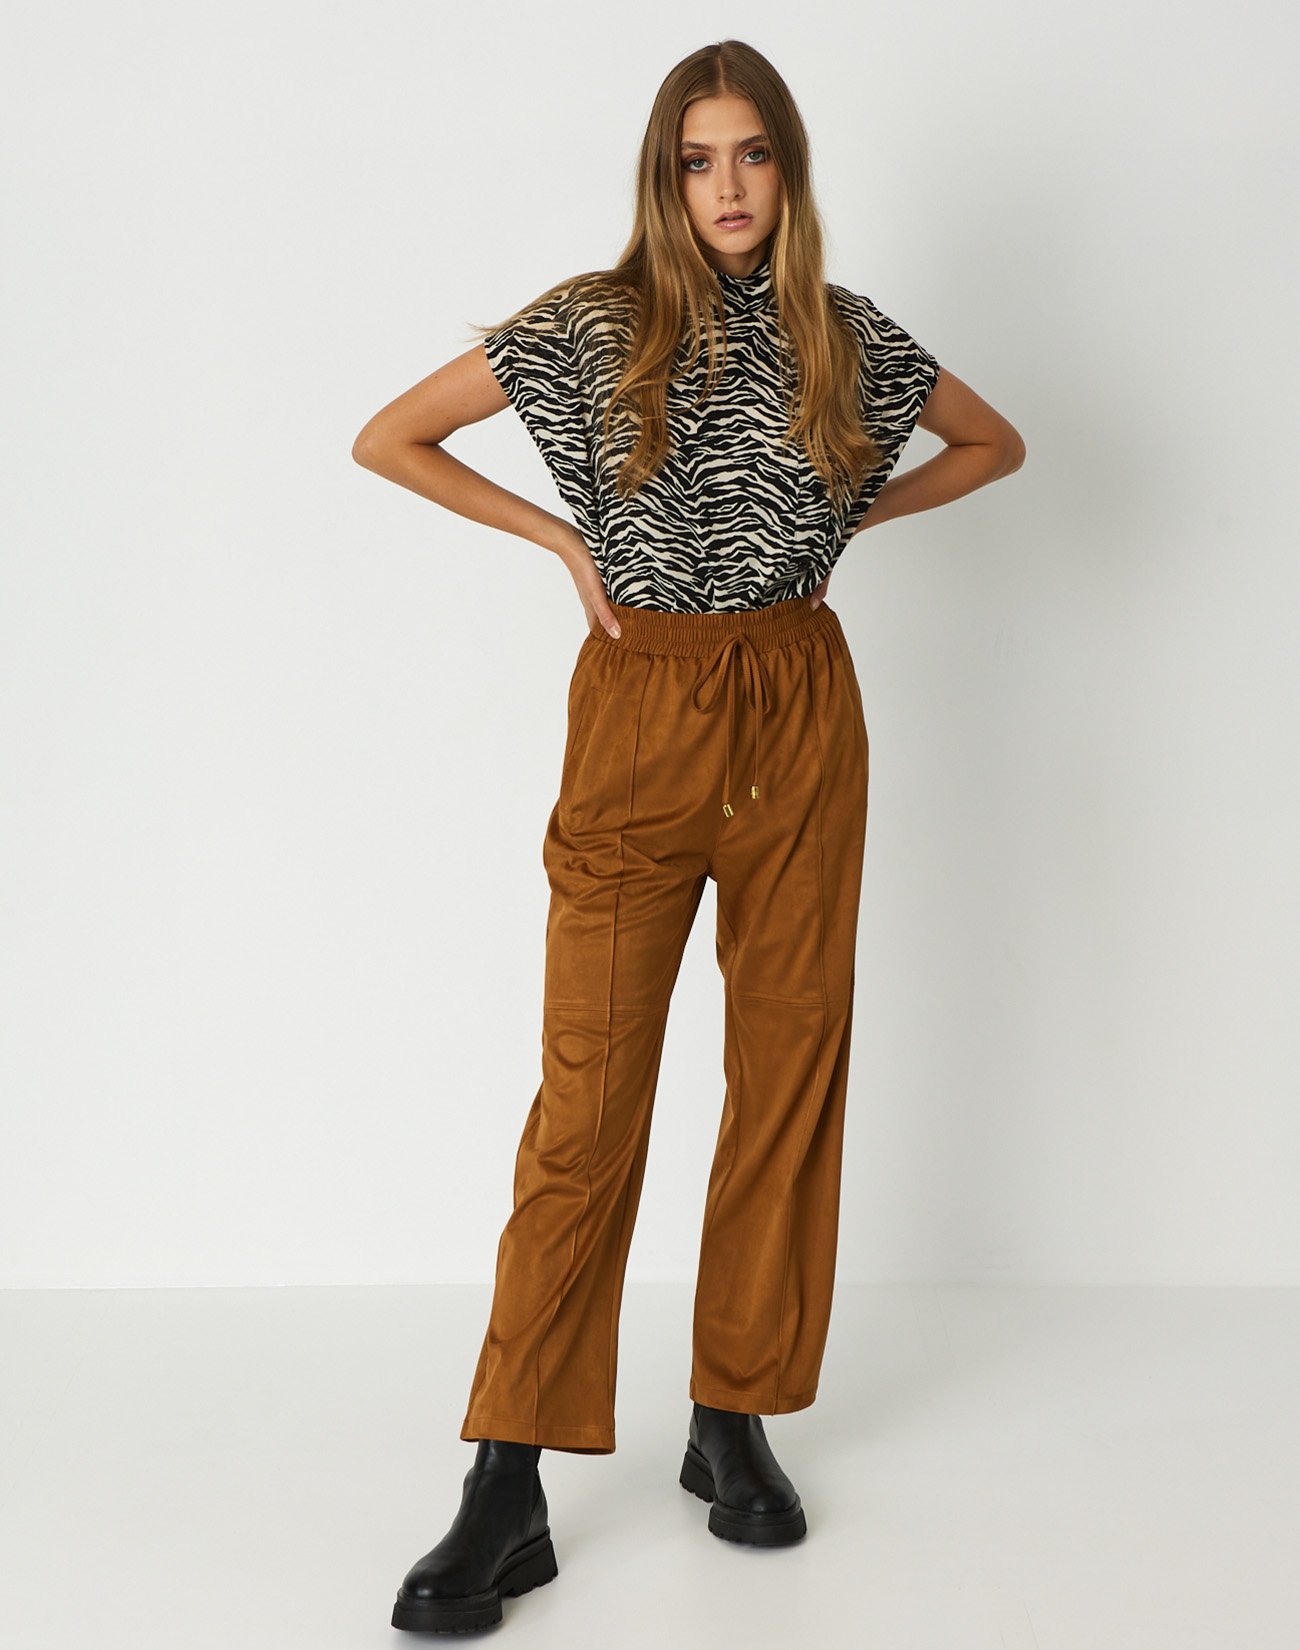 Trousers wih suede effect